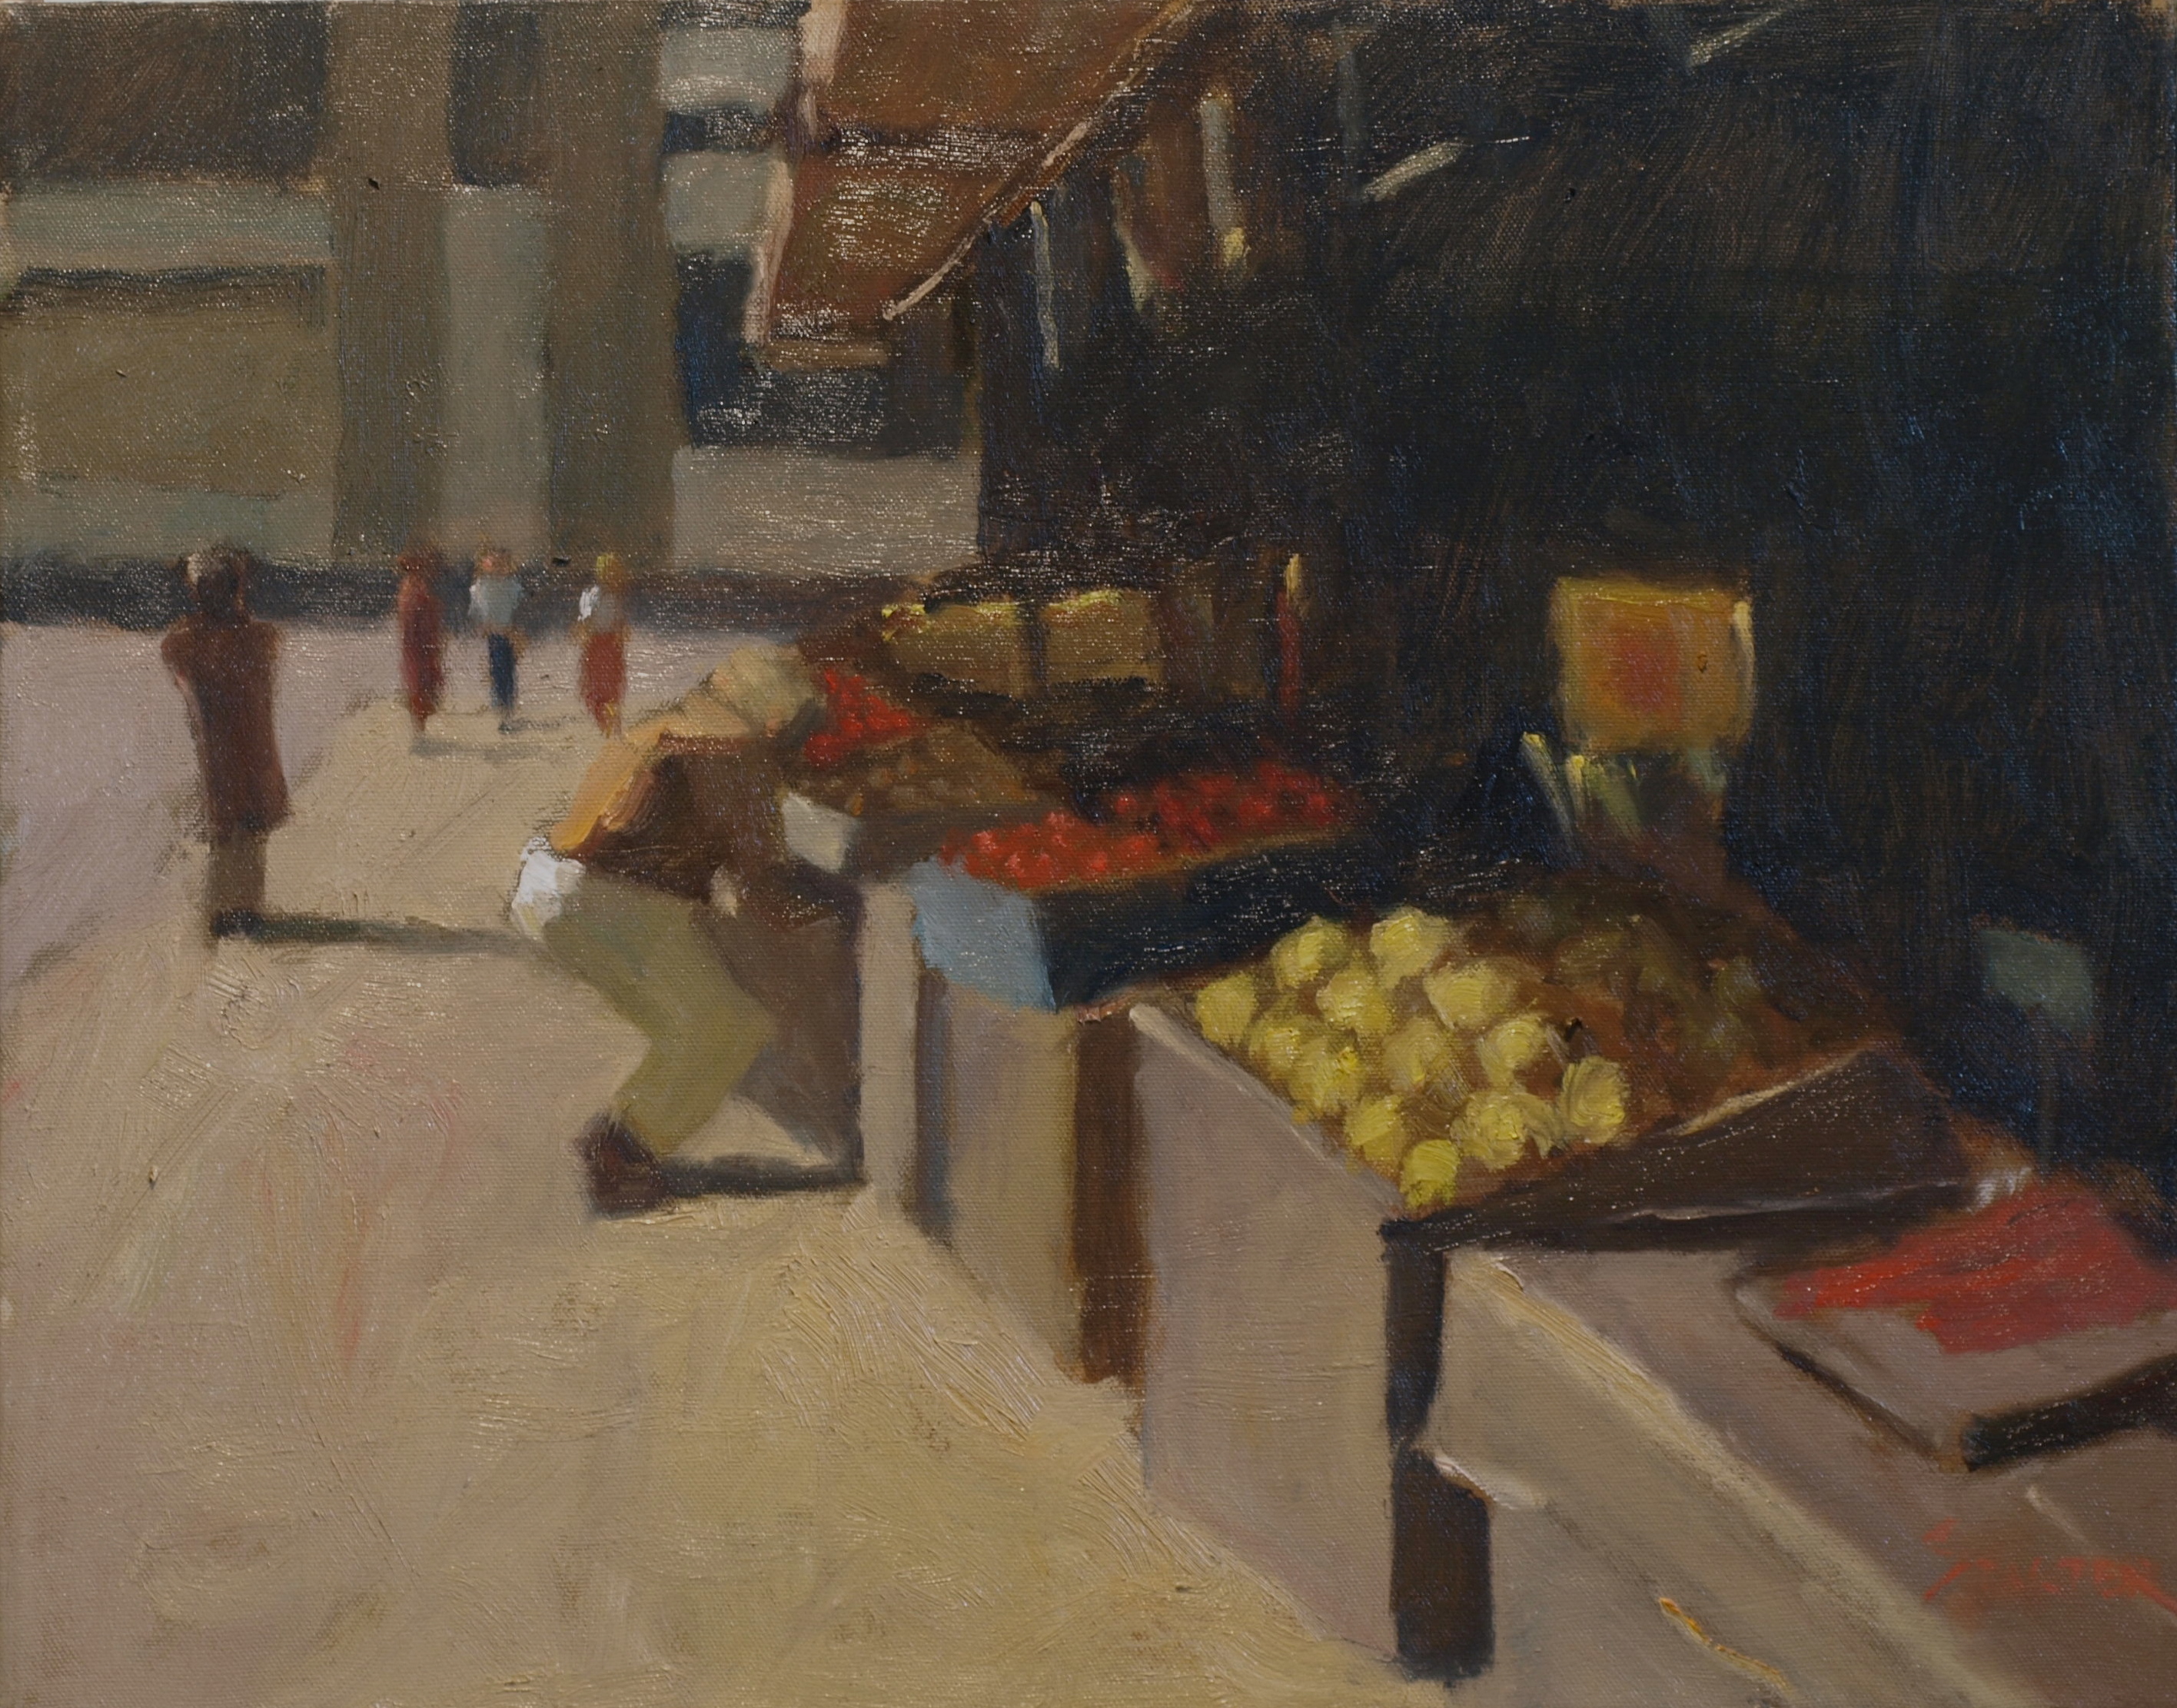 Buying Fruit, Oil on Canvas, 16 x 20 Inches, by Richard Stalter, $550